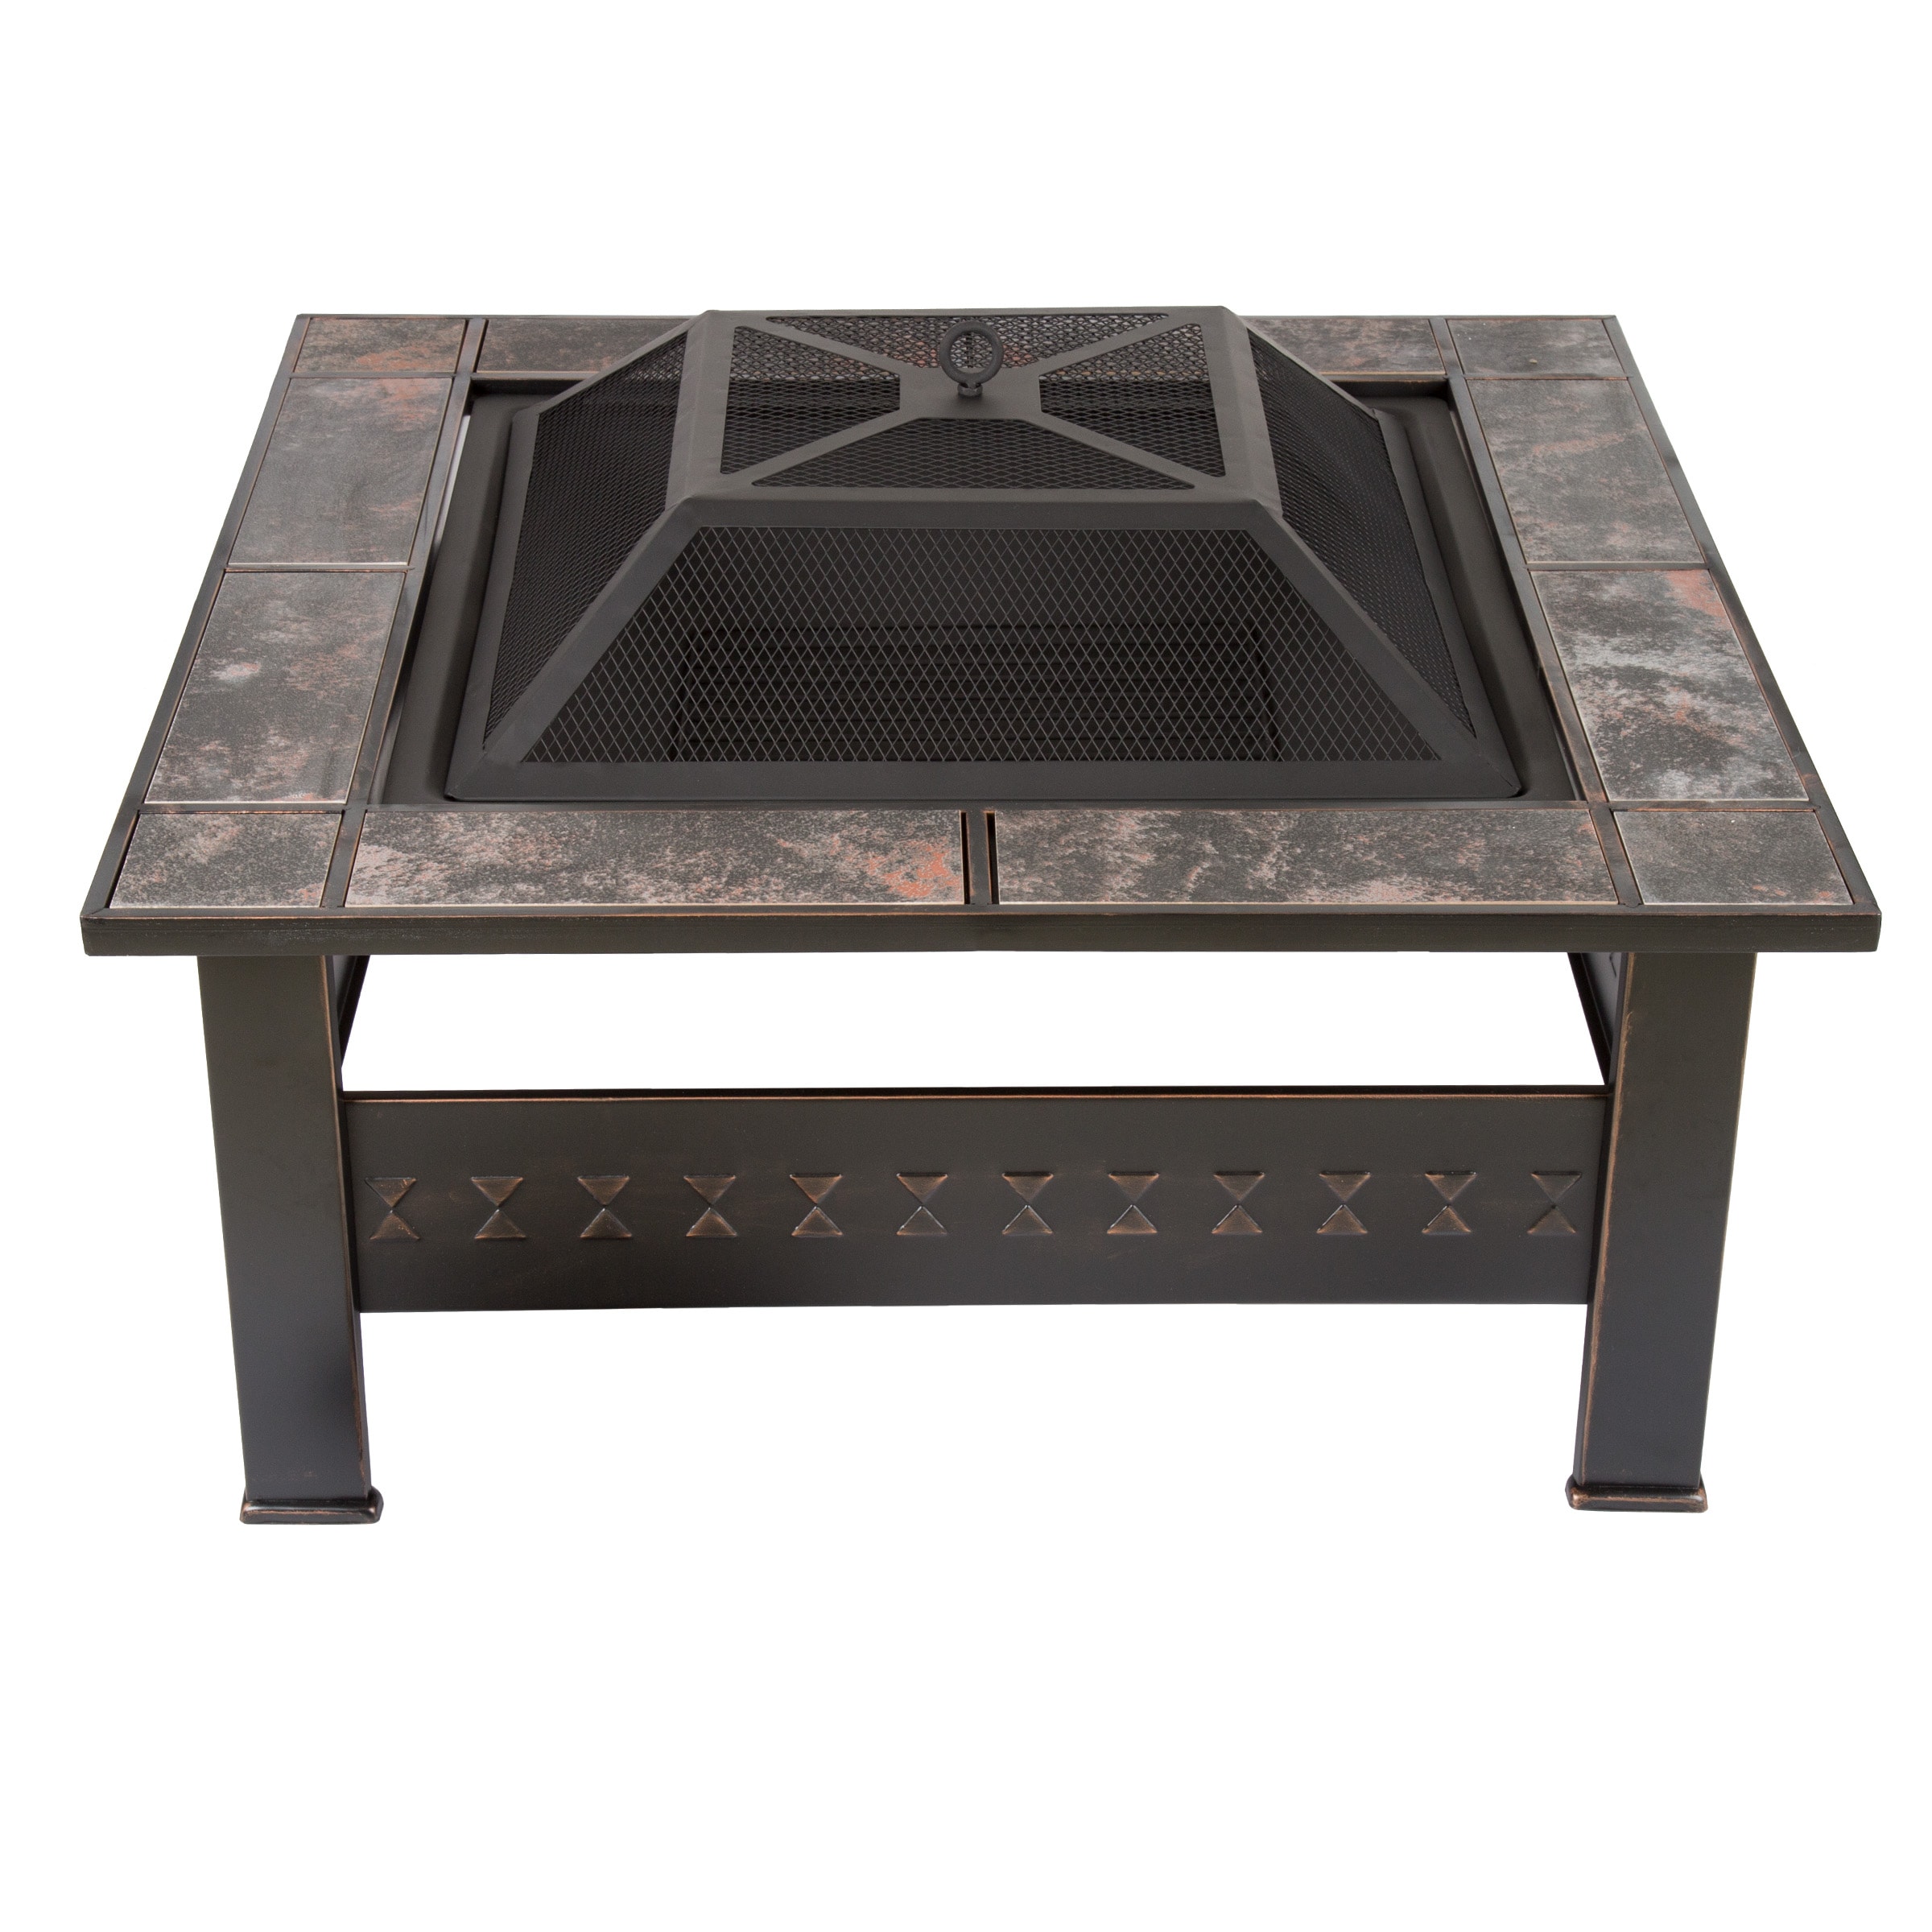 Brown Steel Wood Burning Fire Pit, Marble Fire Pit